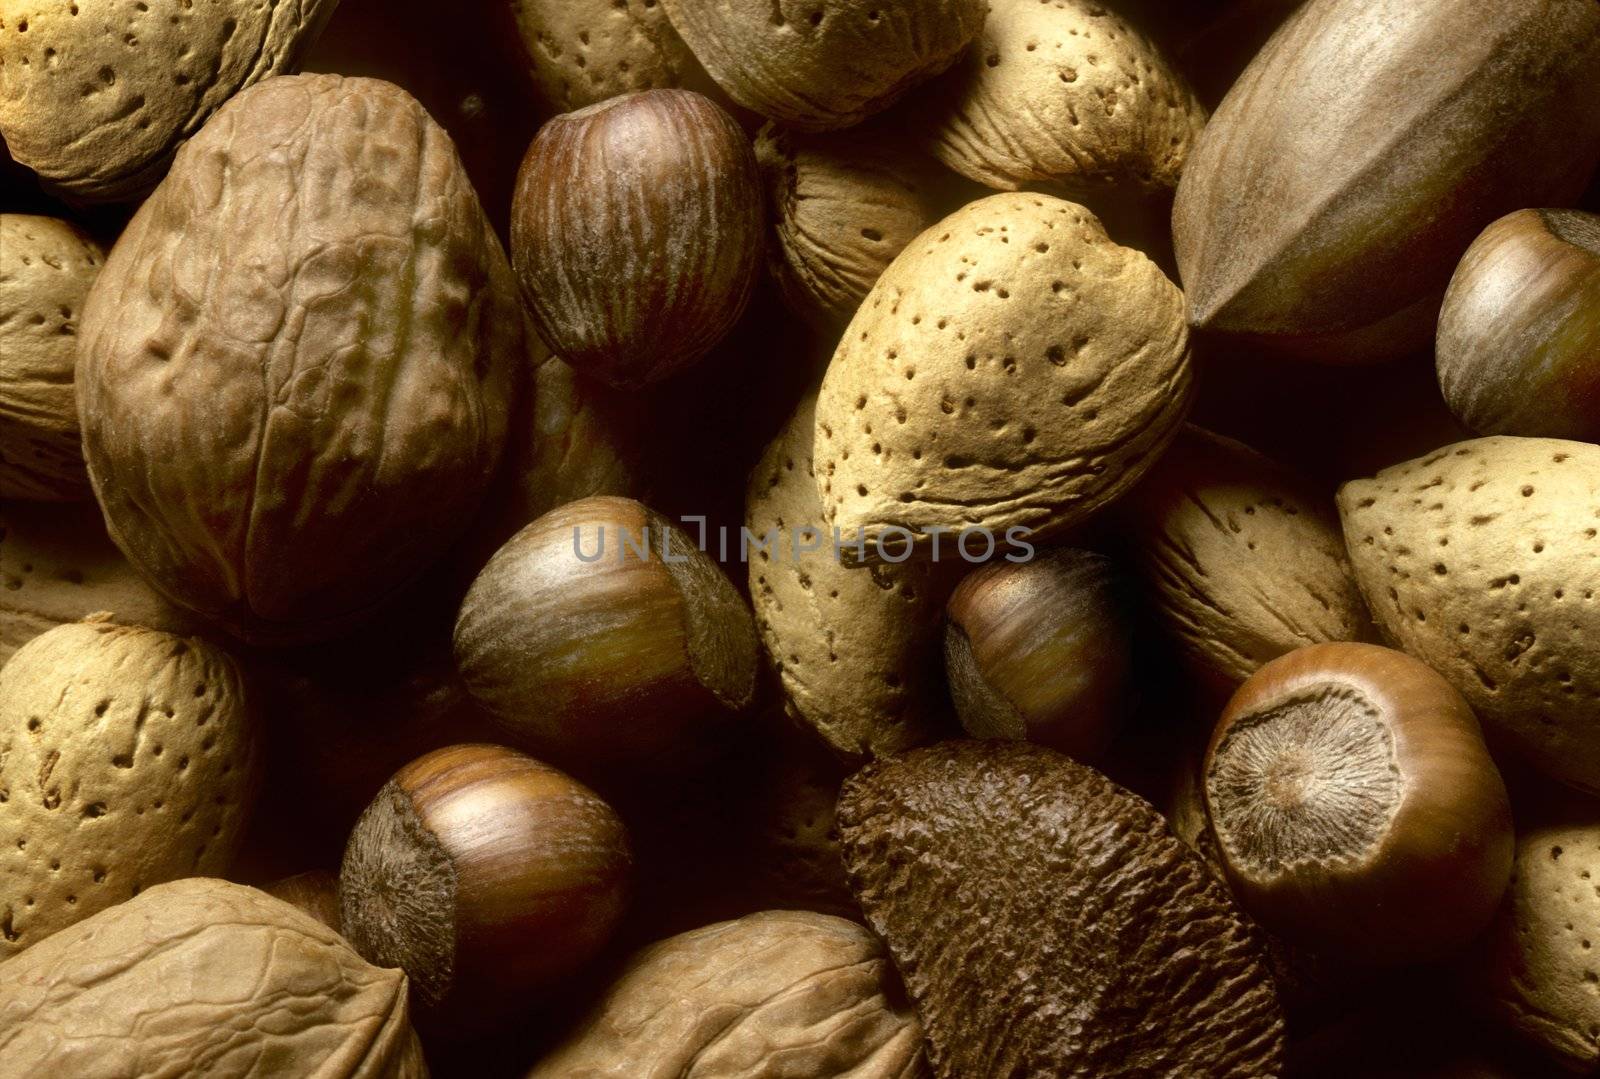 A variety of tree nuts including almonds, hazelnuts, and walnuts